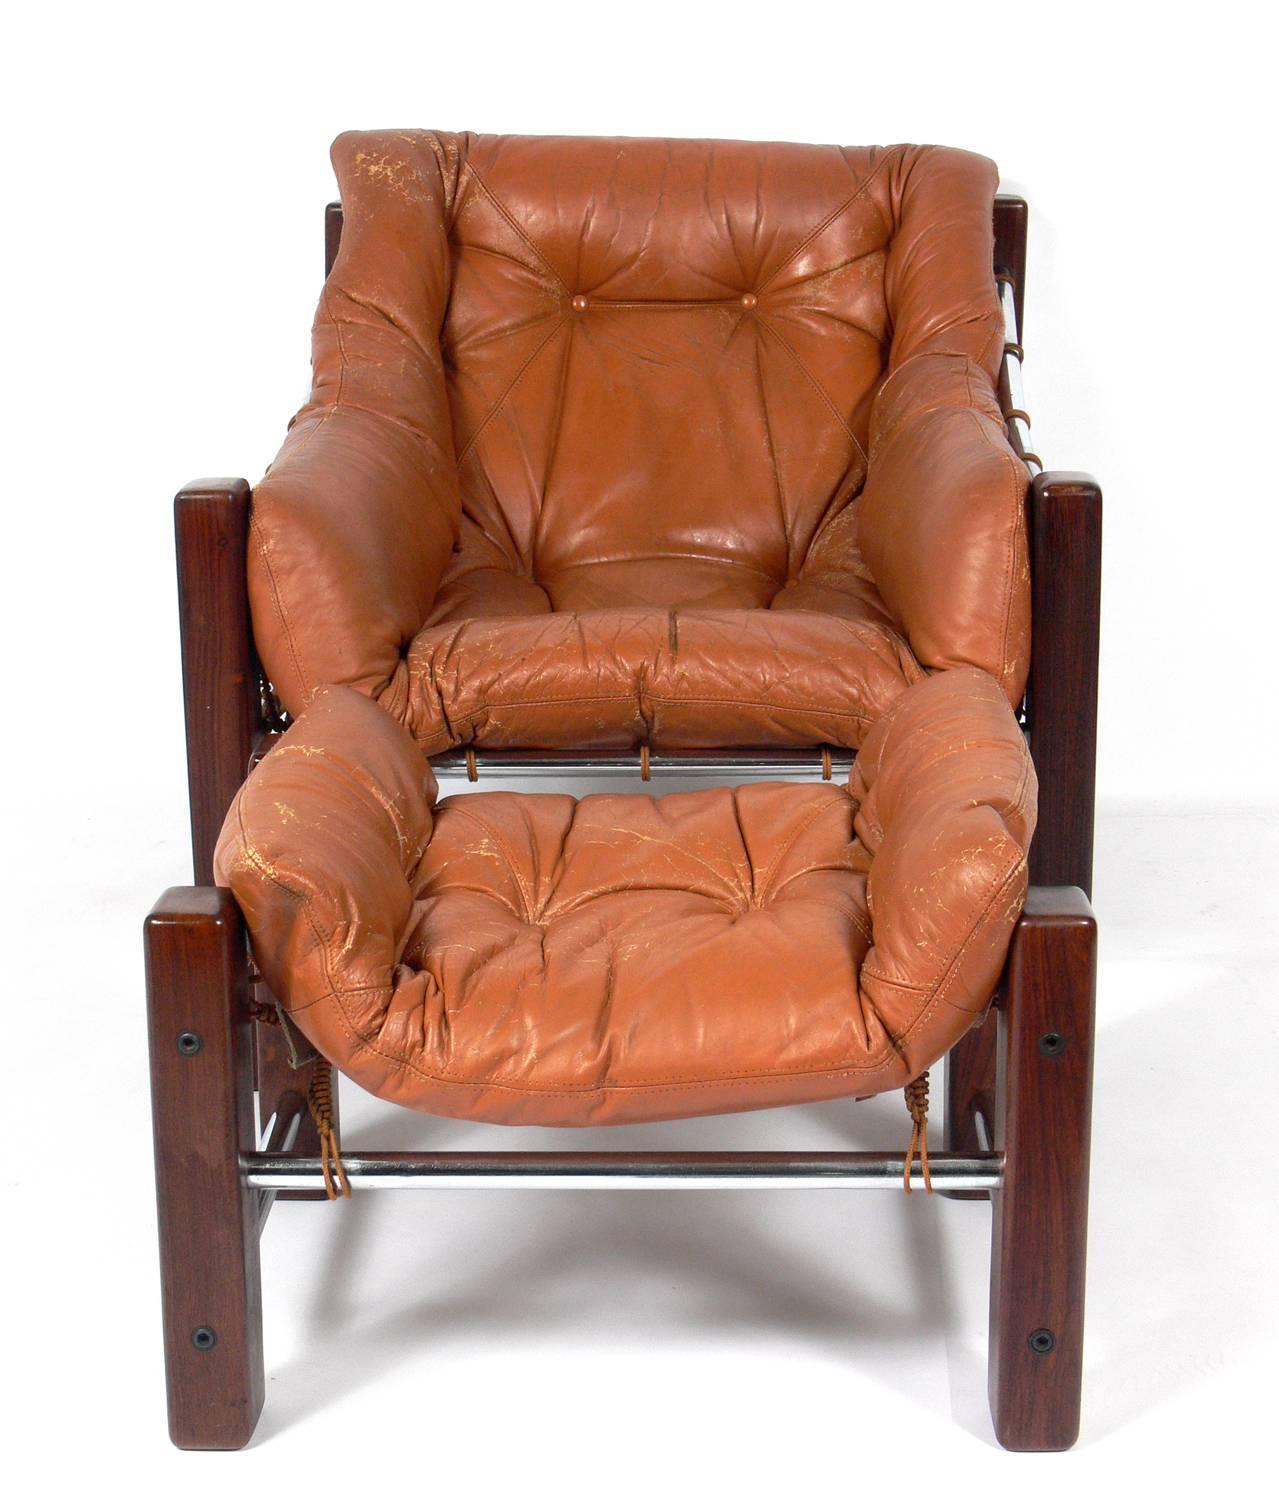 Exotic rosewood or jacaranda and leather Brazilian lounge chair and ottoman, designed by Jean Gillon for Italma Wood Art, Brazil, circa 1960s. It retains it's original leather upholstery, which is perfectly worn and broken in if you like aged